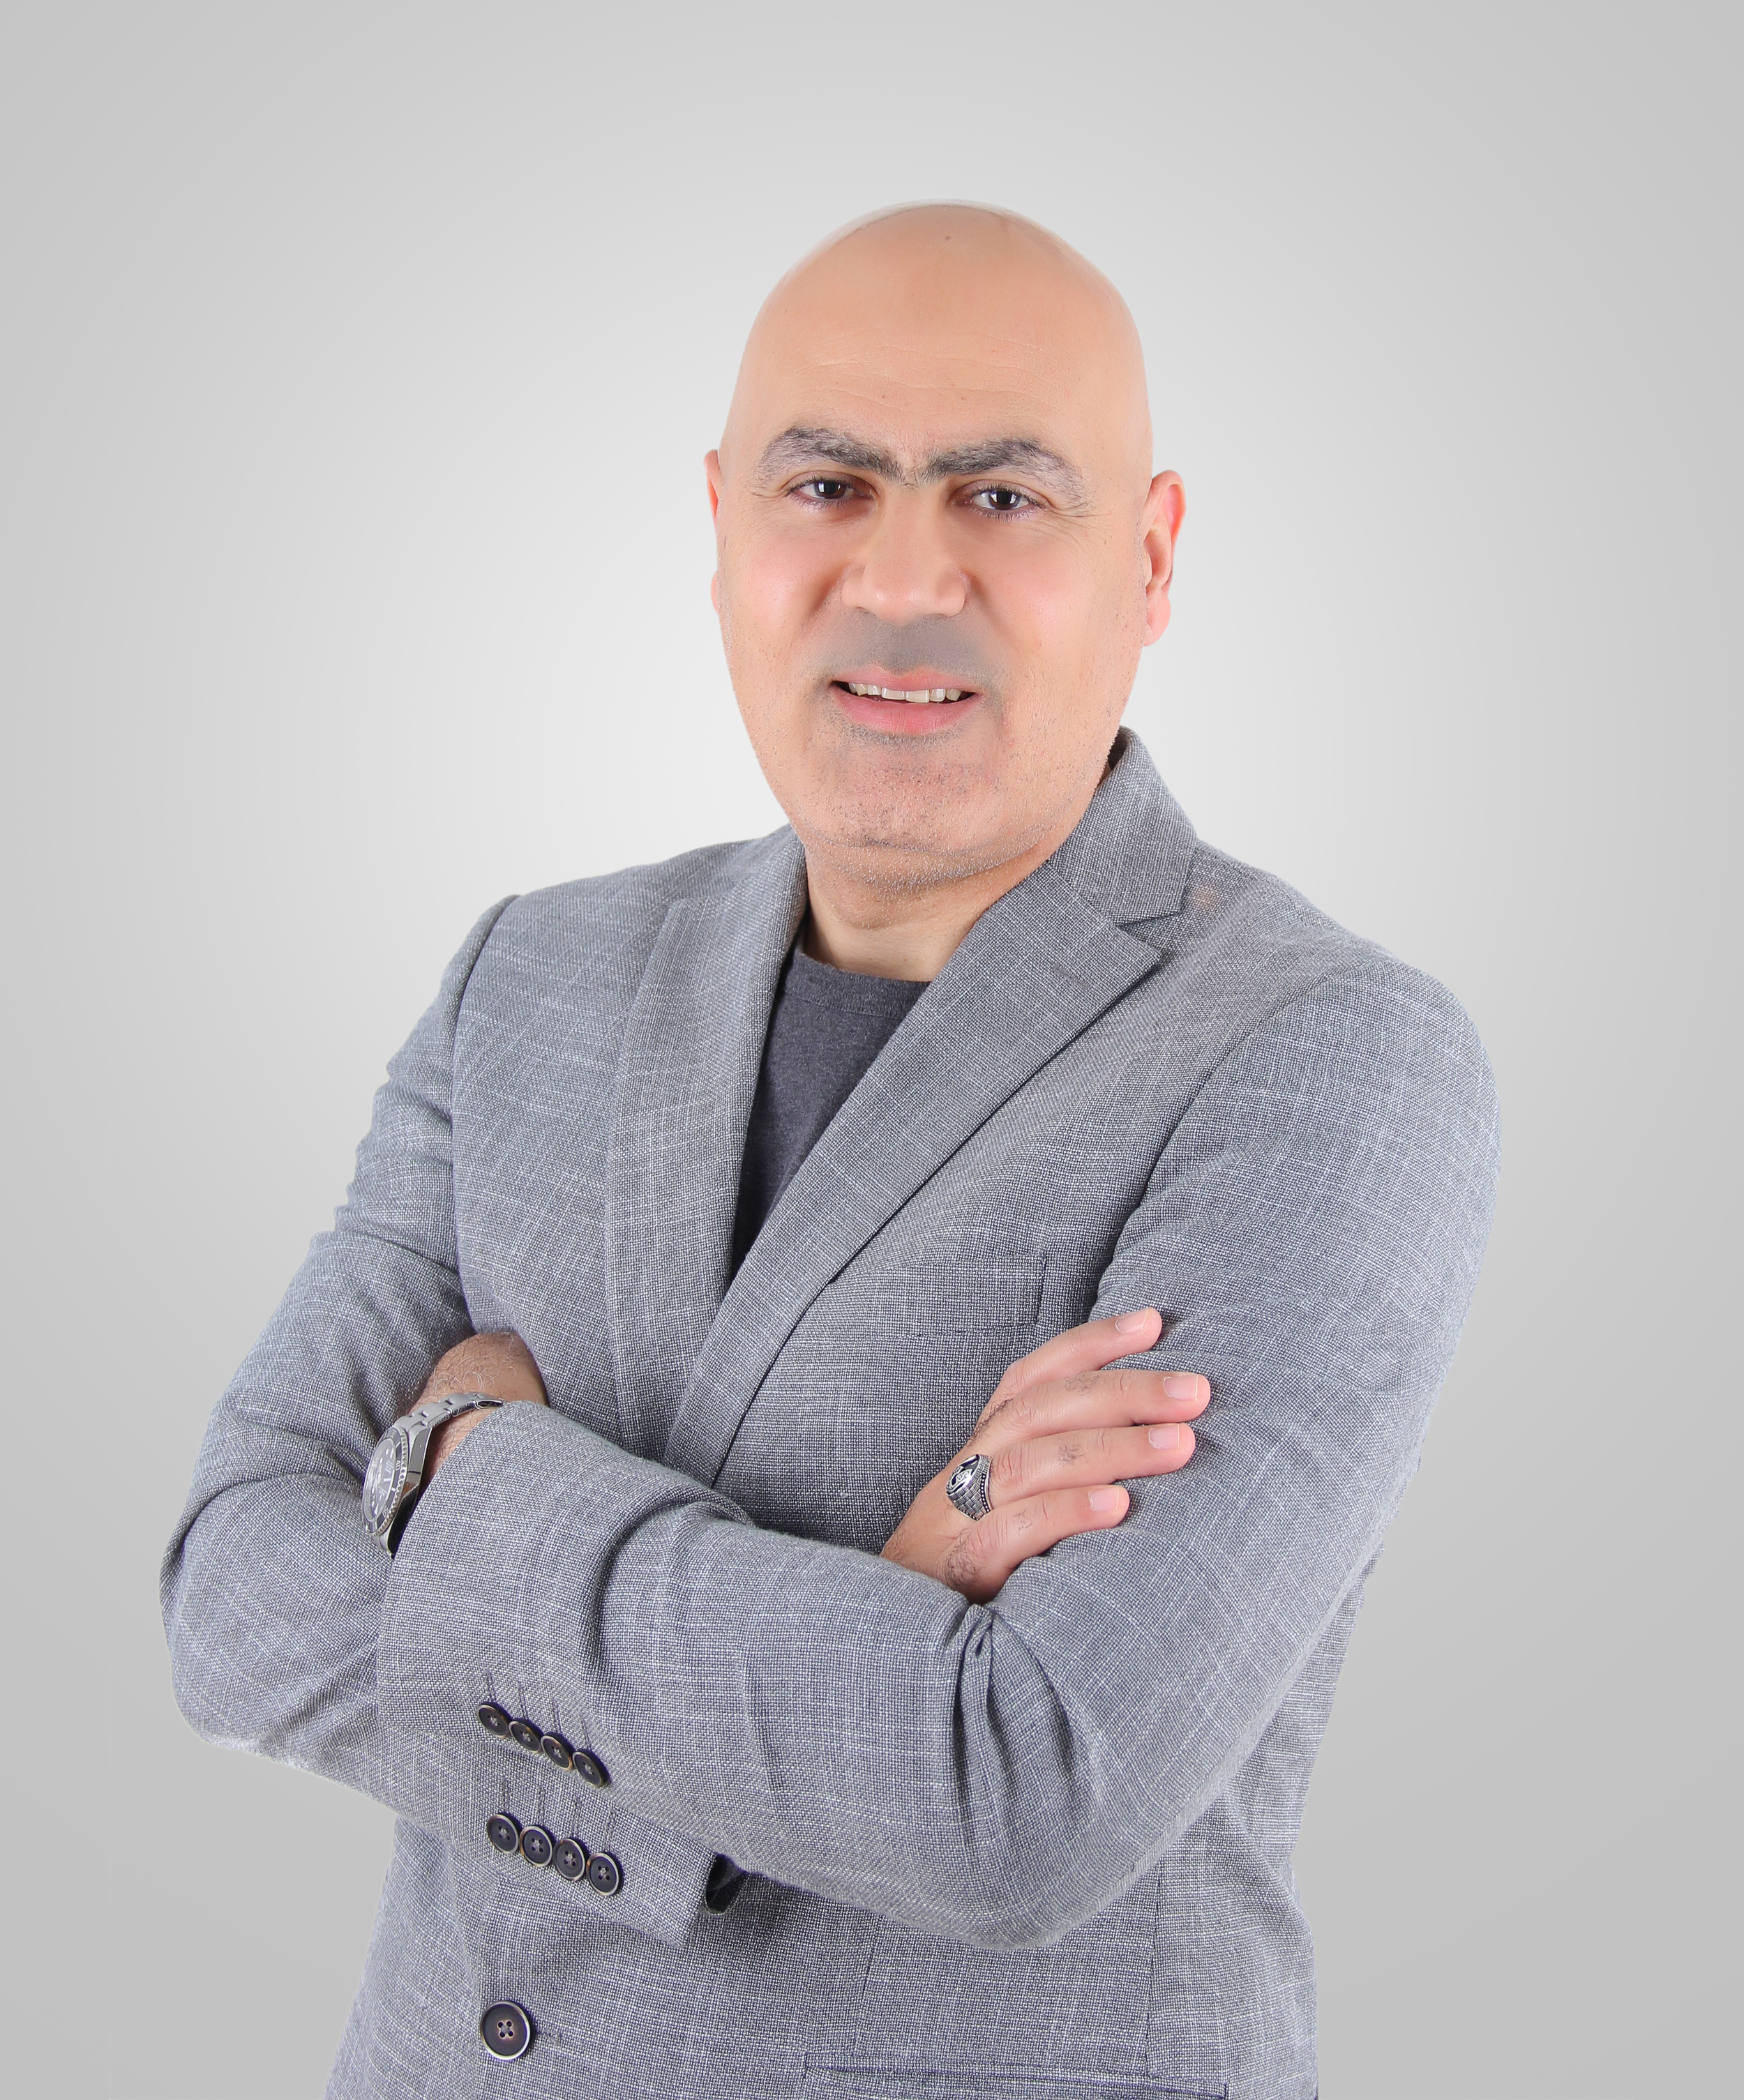 Fintech Holding 180 Capital Appoints Samer Abuzahra to Lead Its Next Growth Phase thumbnail